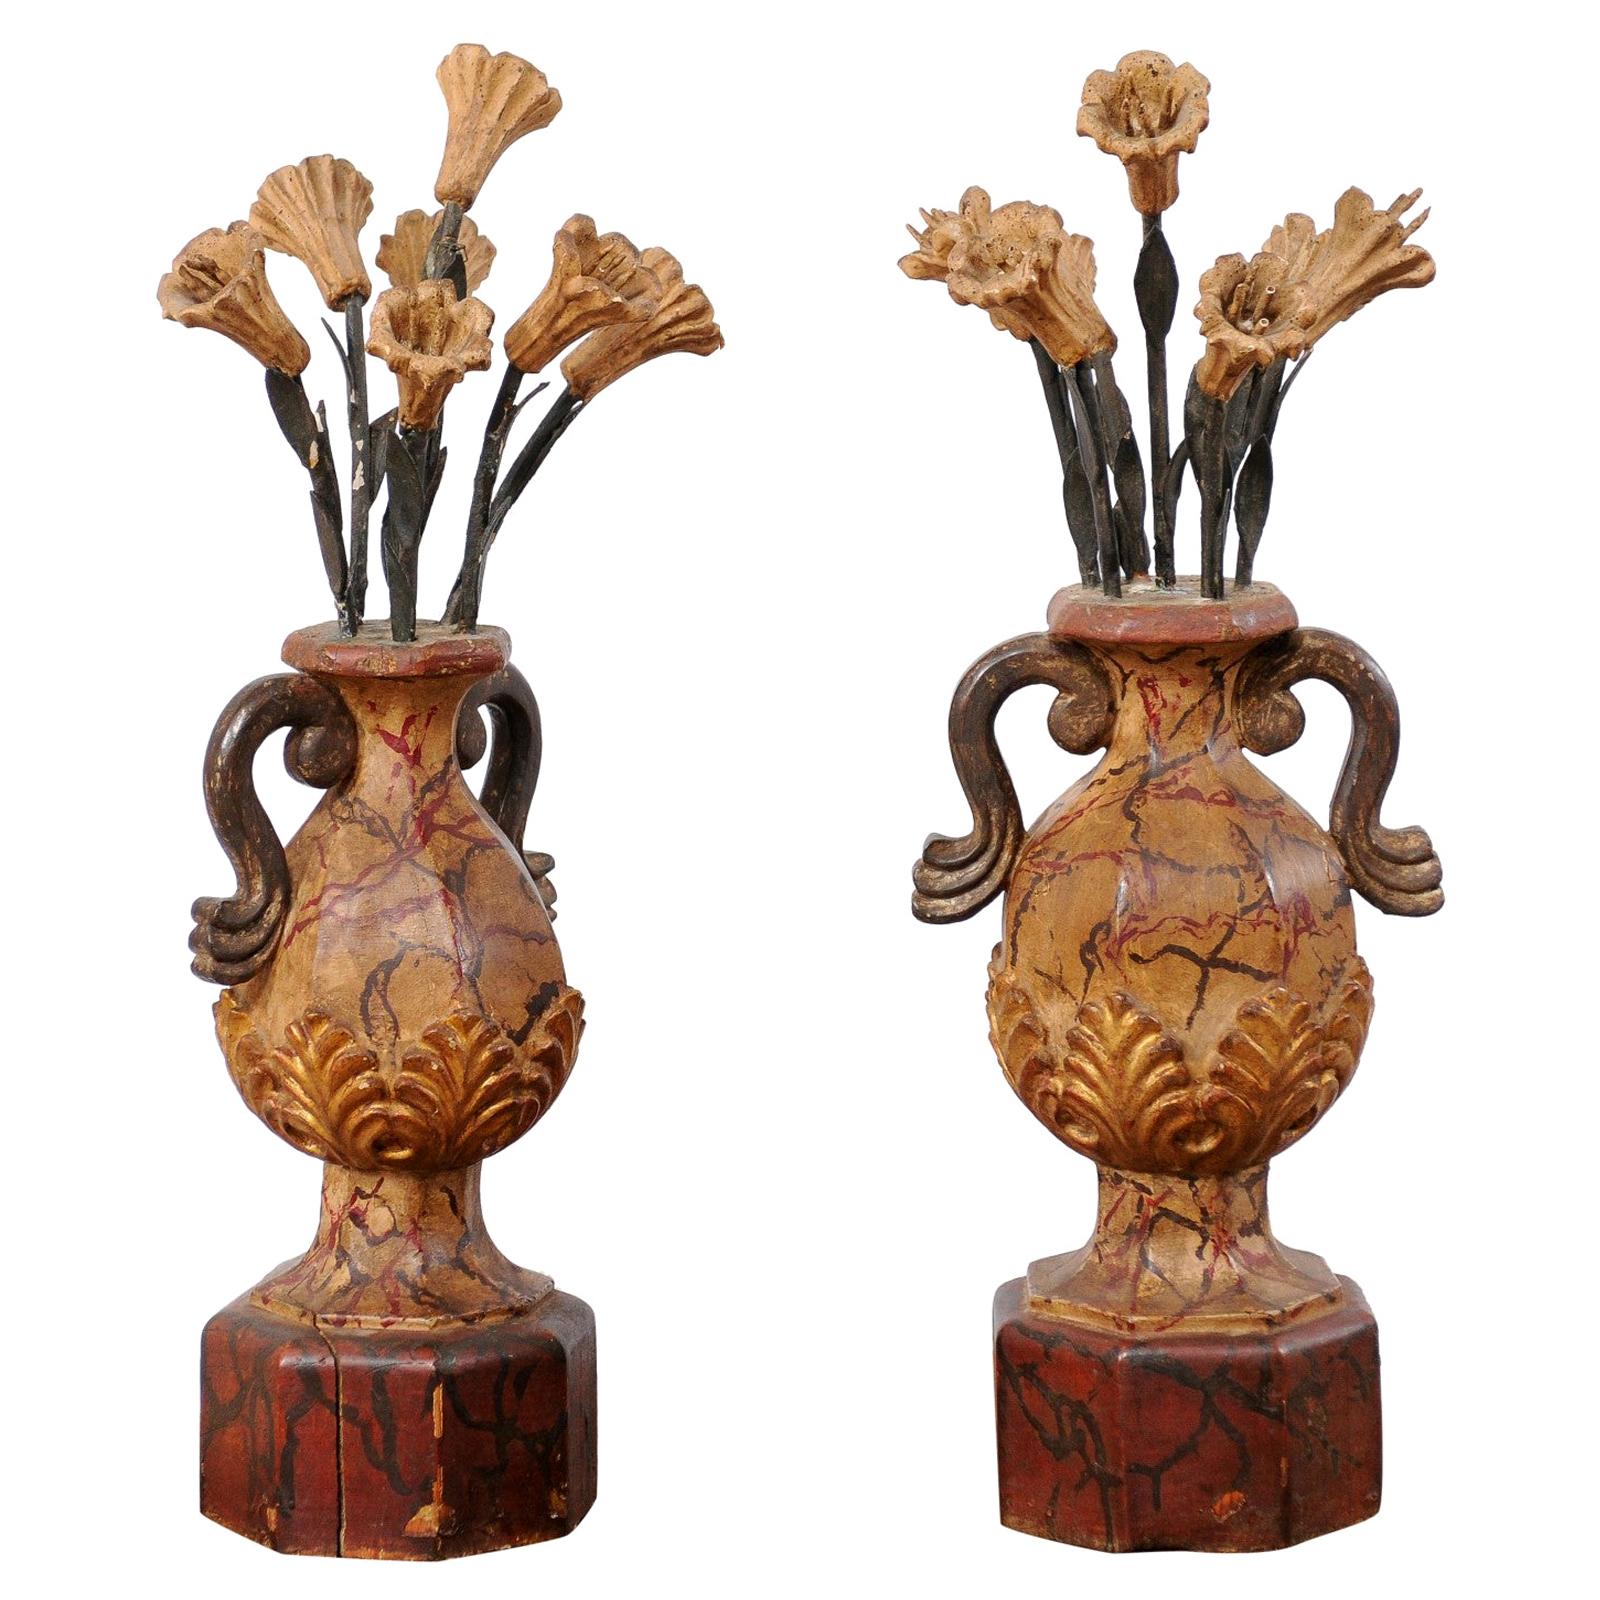 Pair of Italian Antique Carved-Wood Bouquet Urns with Polychrome Finish